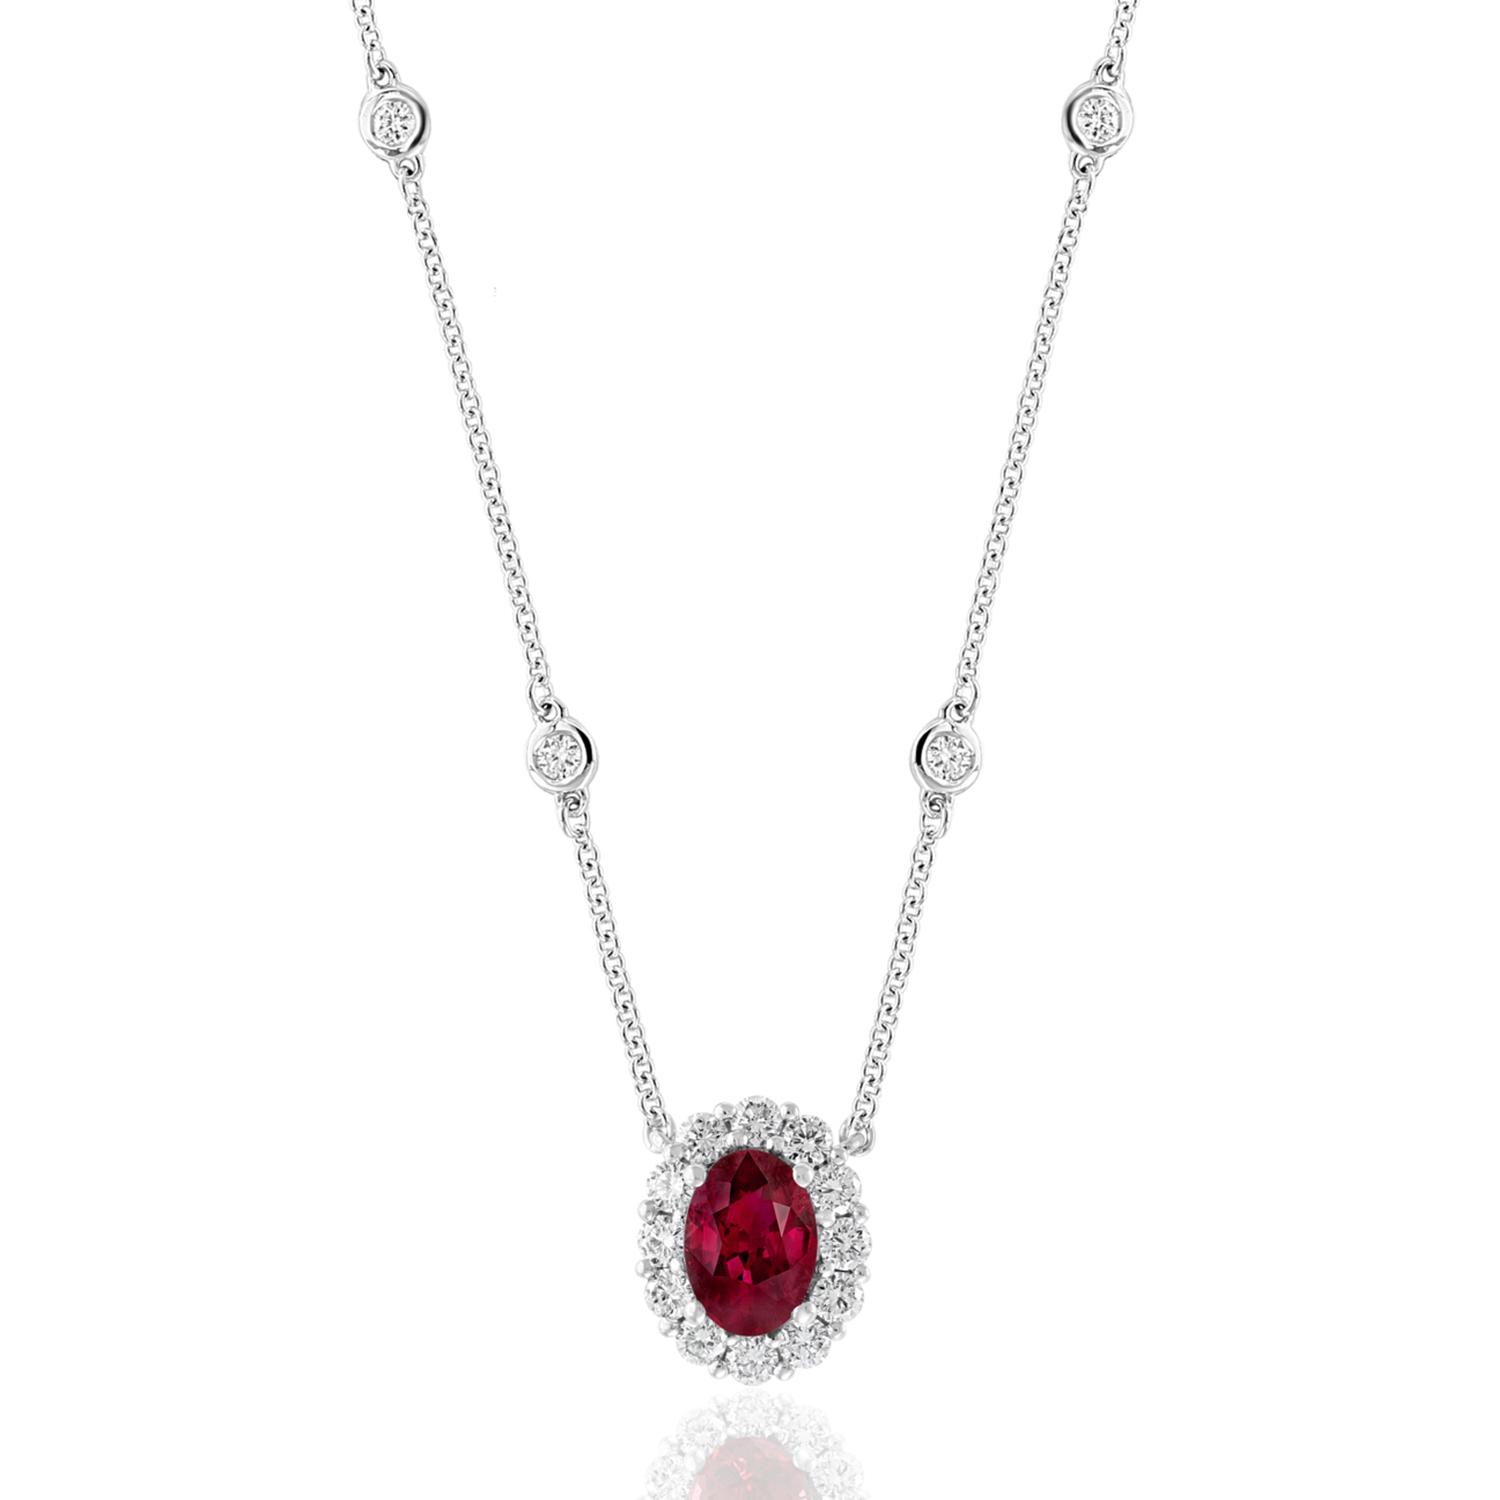 Oval Ruby Pendant Necklace with Diamond Halo and Diamond Station Chain